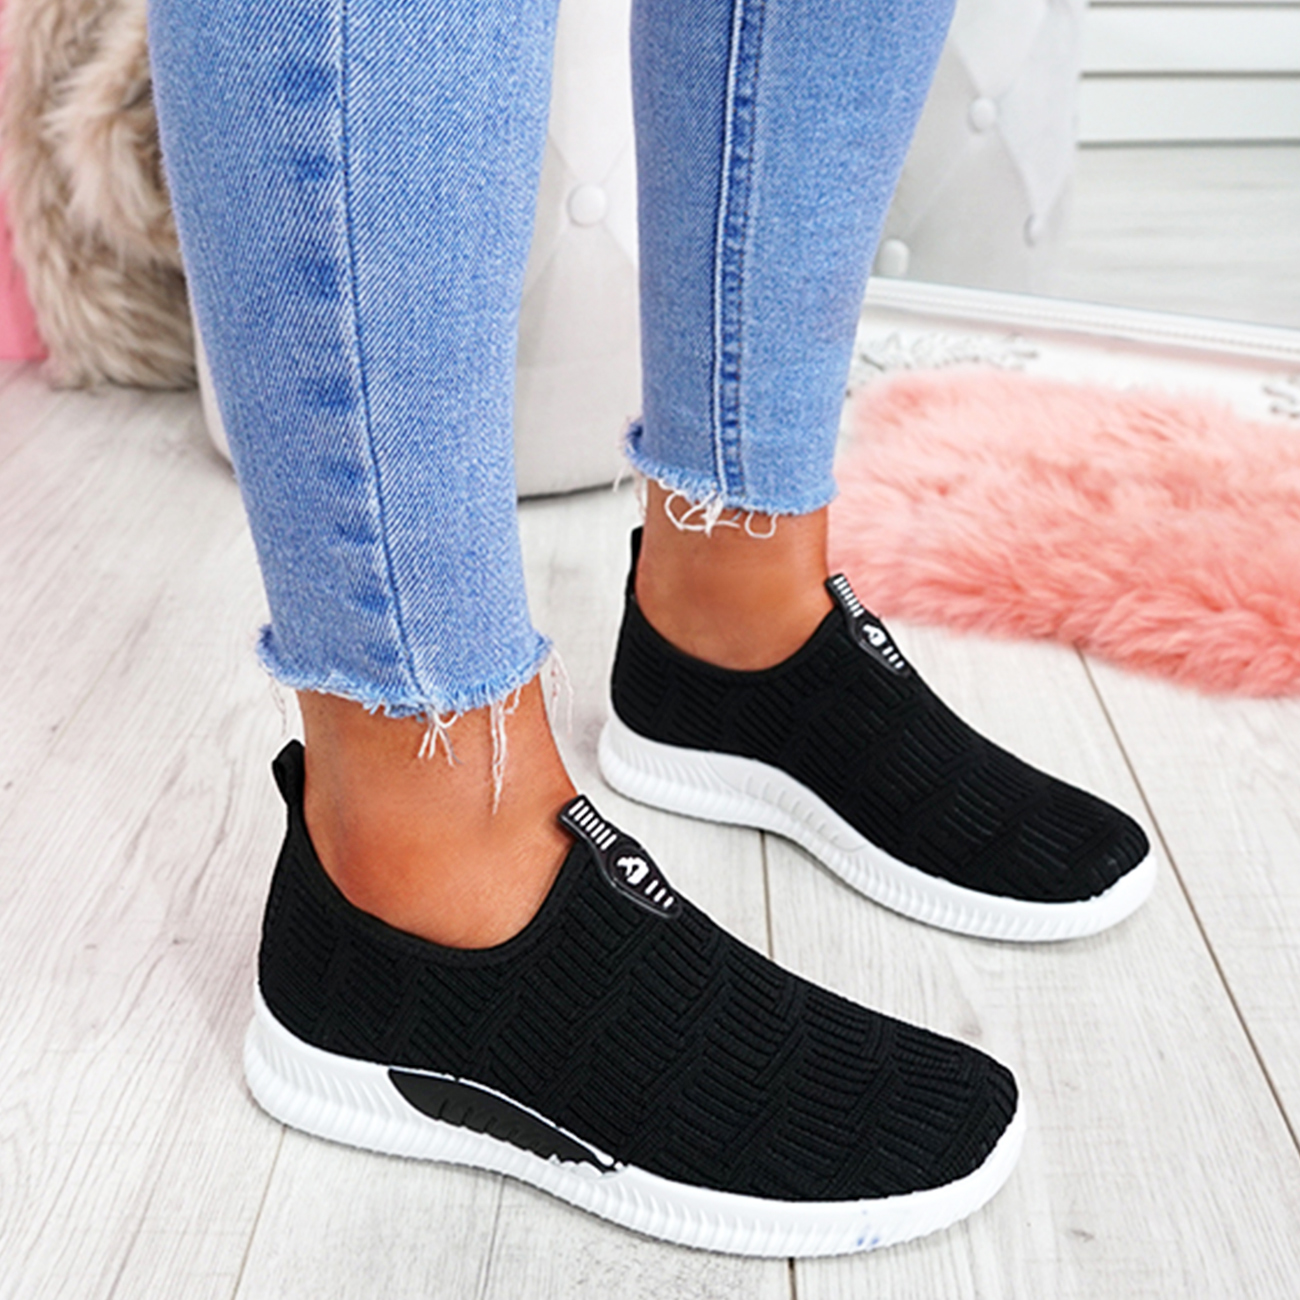 WOMENS SLIP ON KNIT STYLE TRAINERS LADIES SNEAKERS WOMEN SPORT SHOES ...